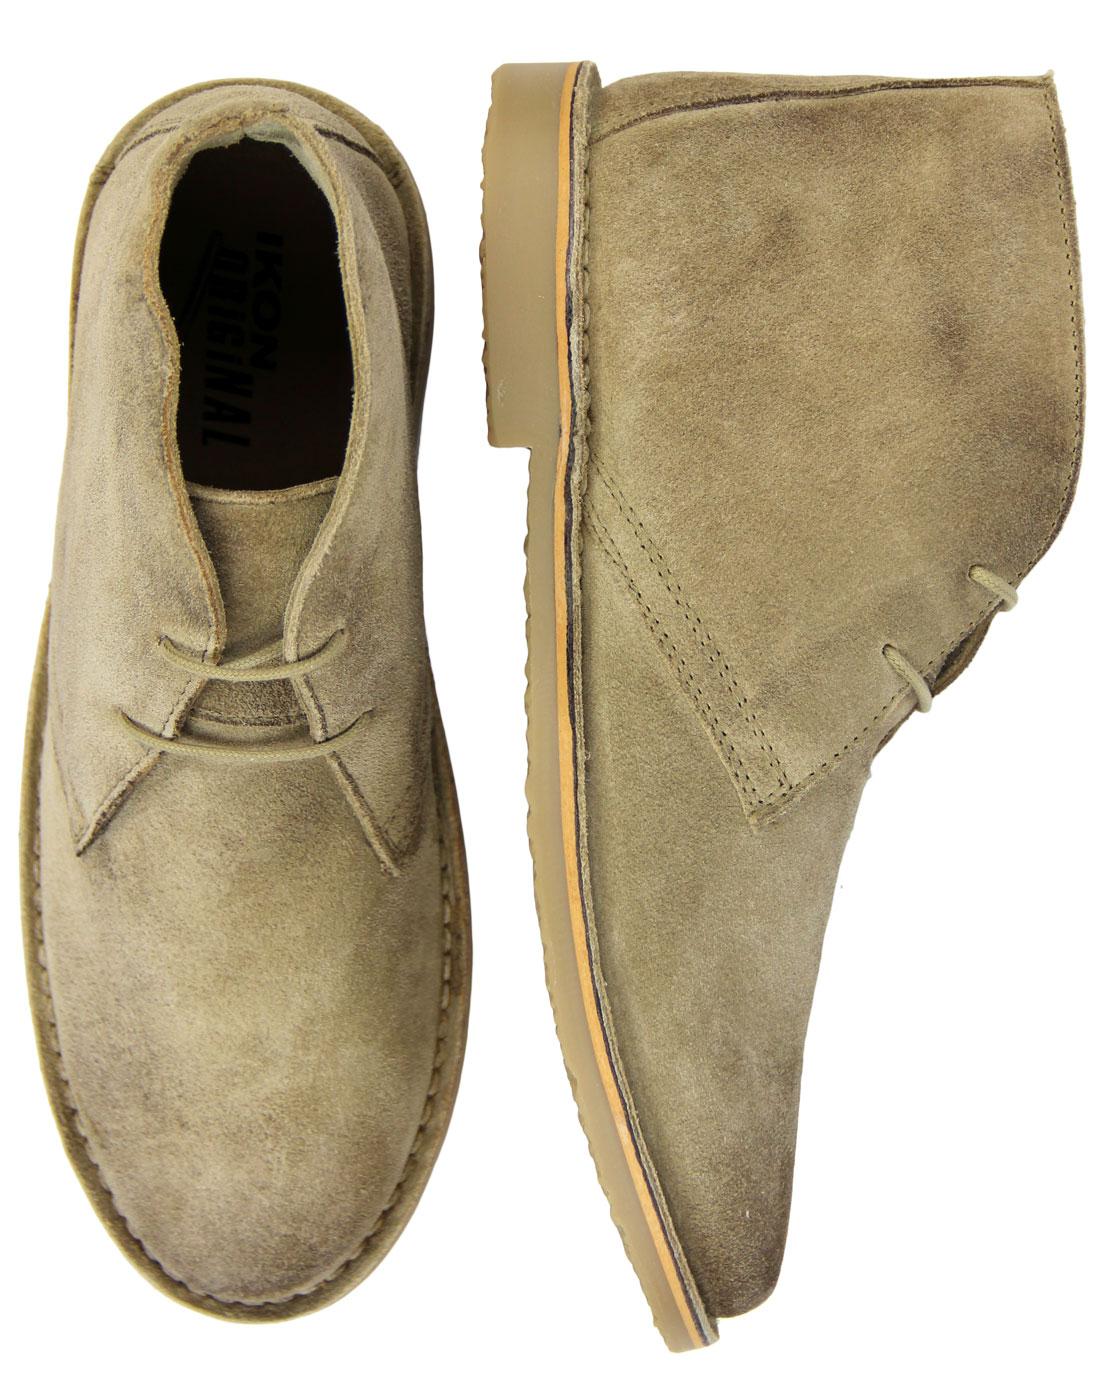 NEW Soft Suede Beige by Ikon Desert Boots Canyon 